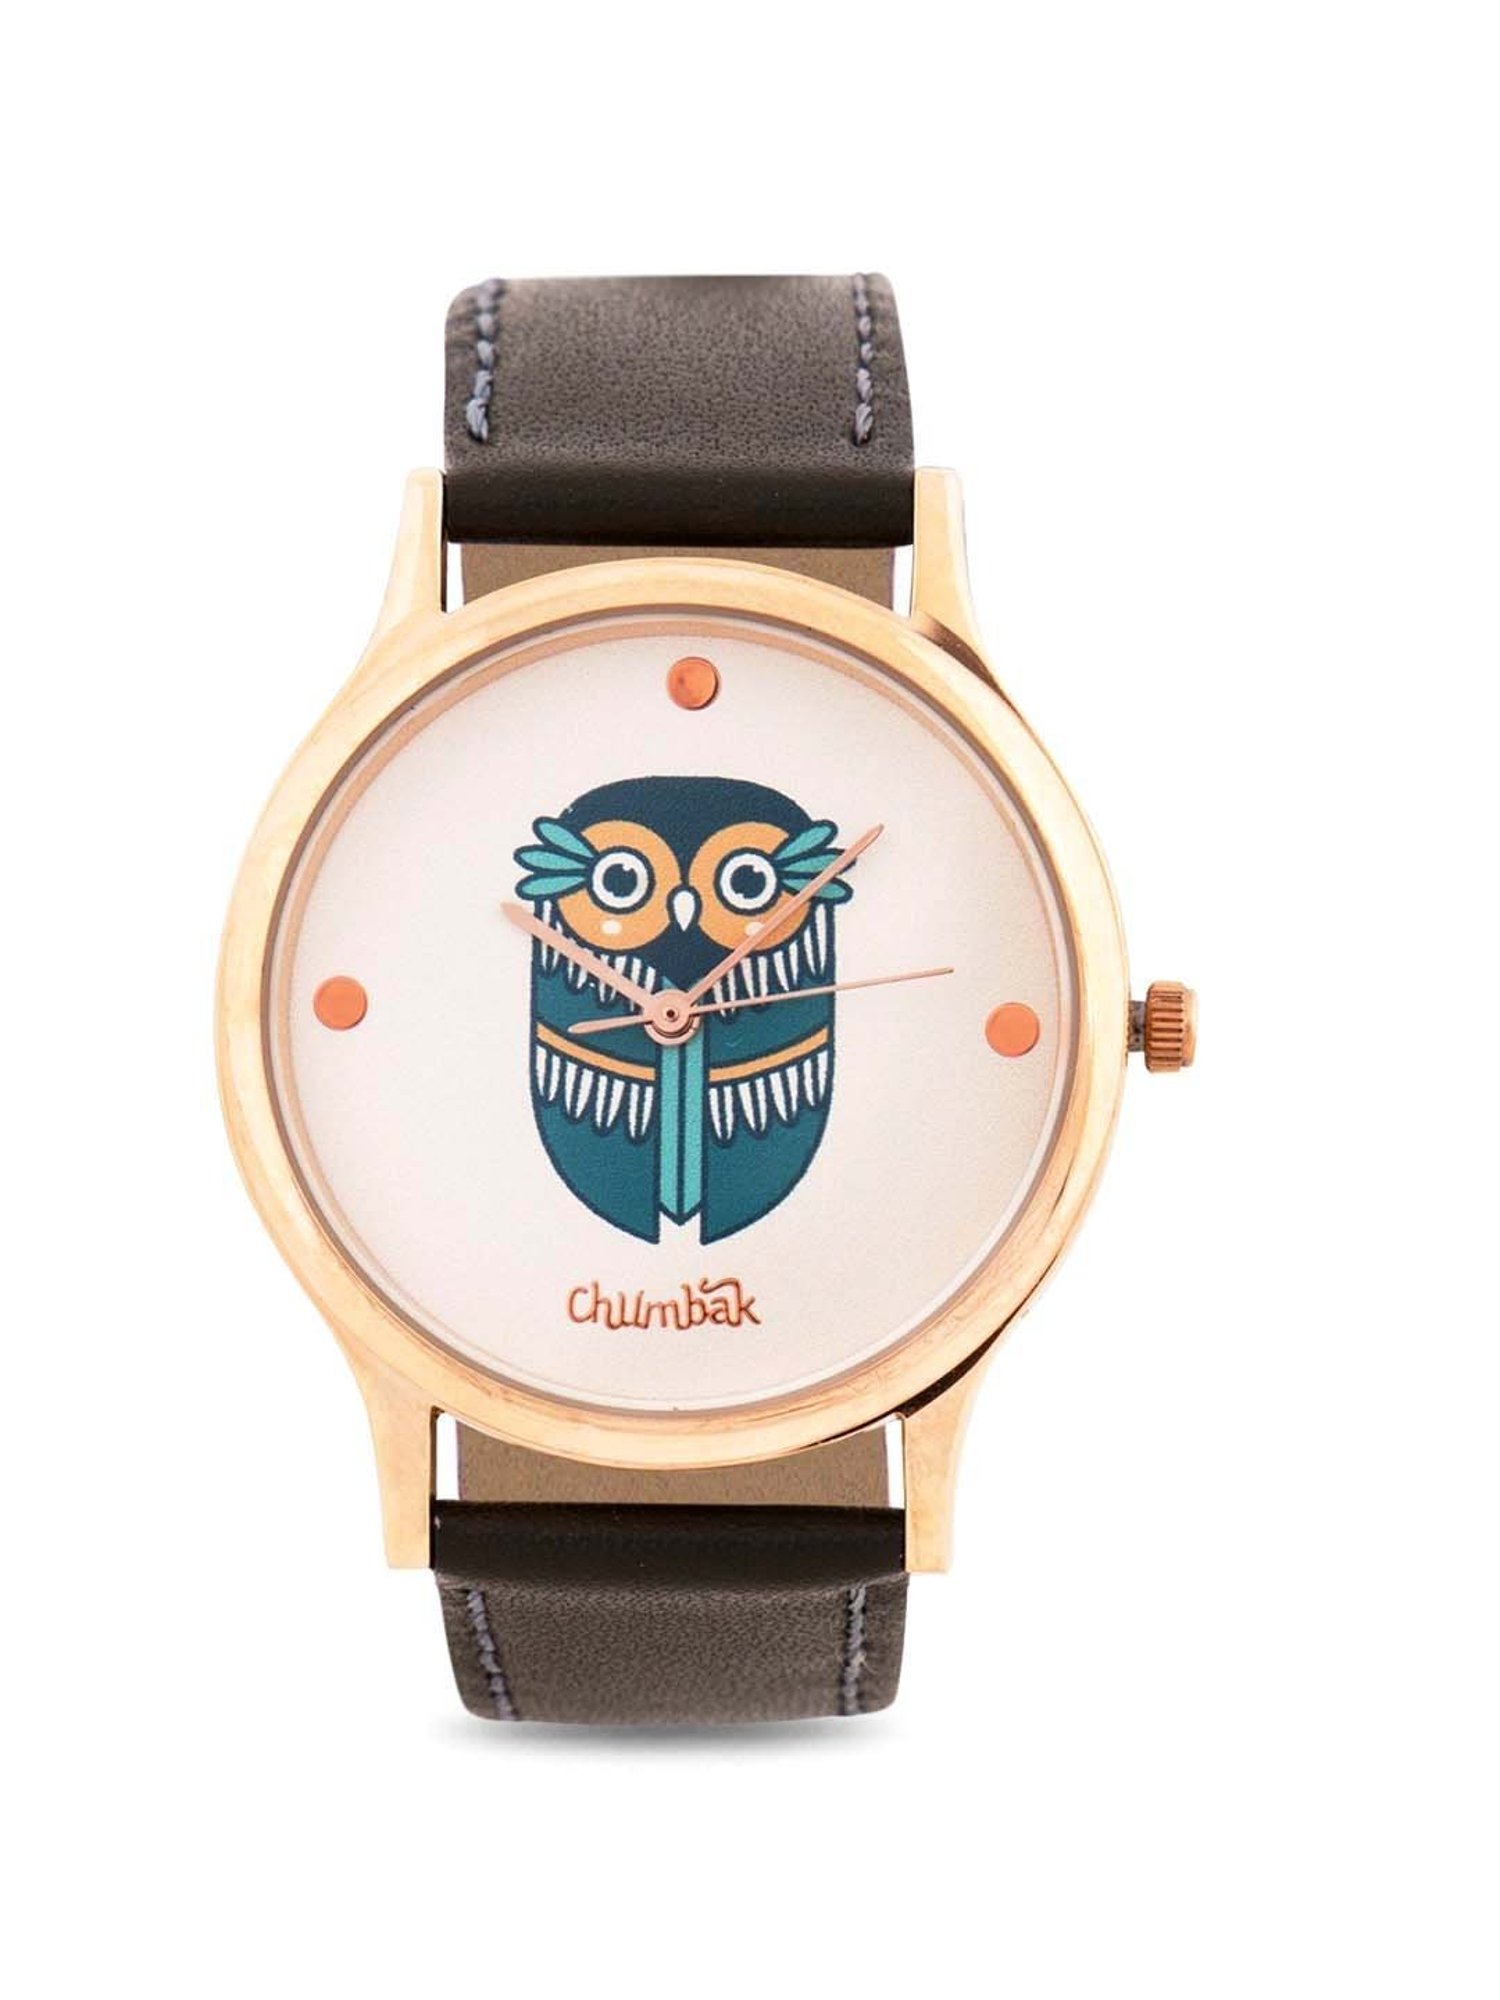 Chumbak Women Silver-Toned Dial & Maroon Leather Straps Analogue Watch  8907605106019 Price in India, Full Specifications & Offers | DTashion.com